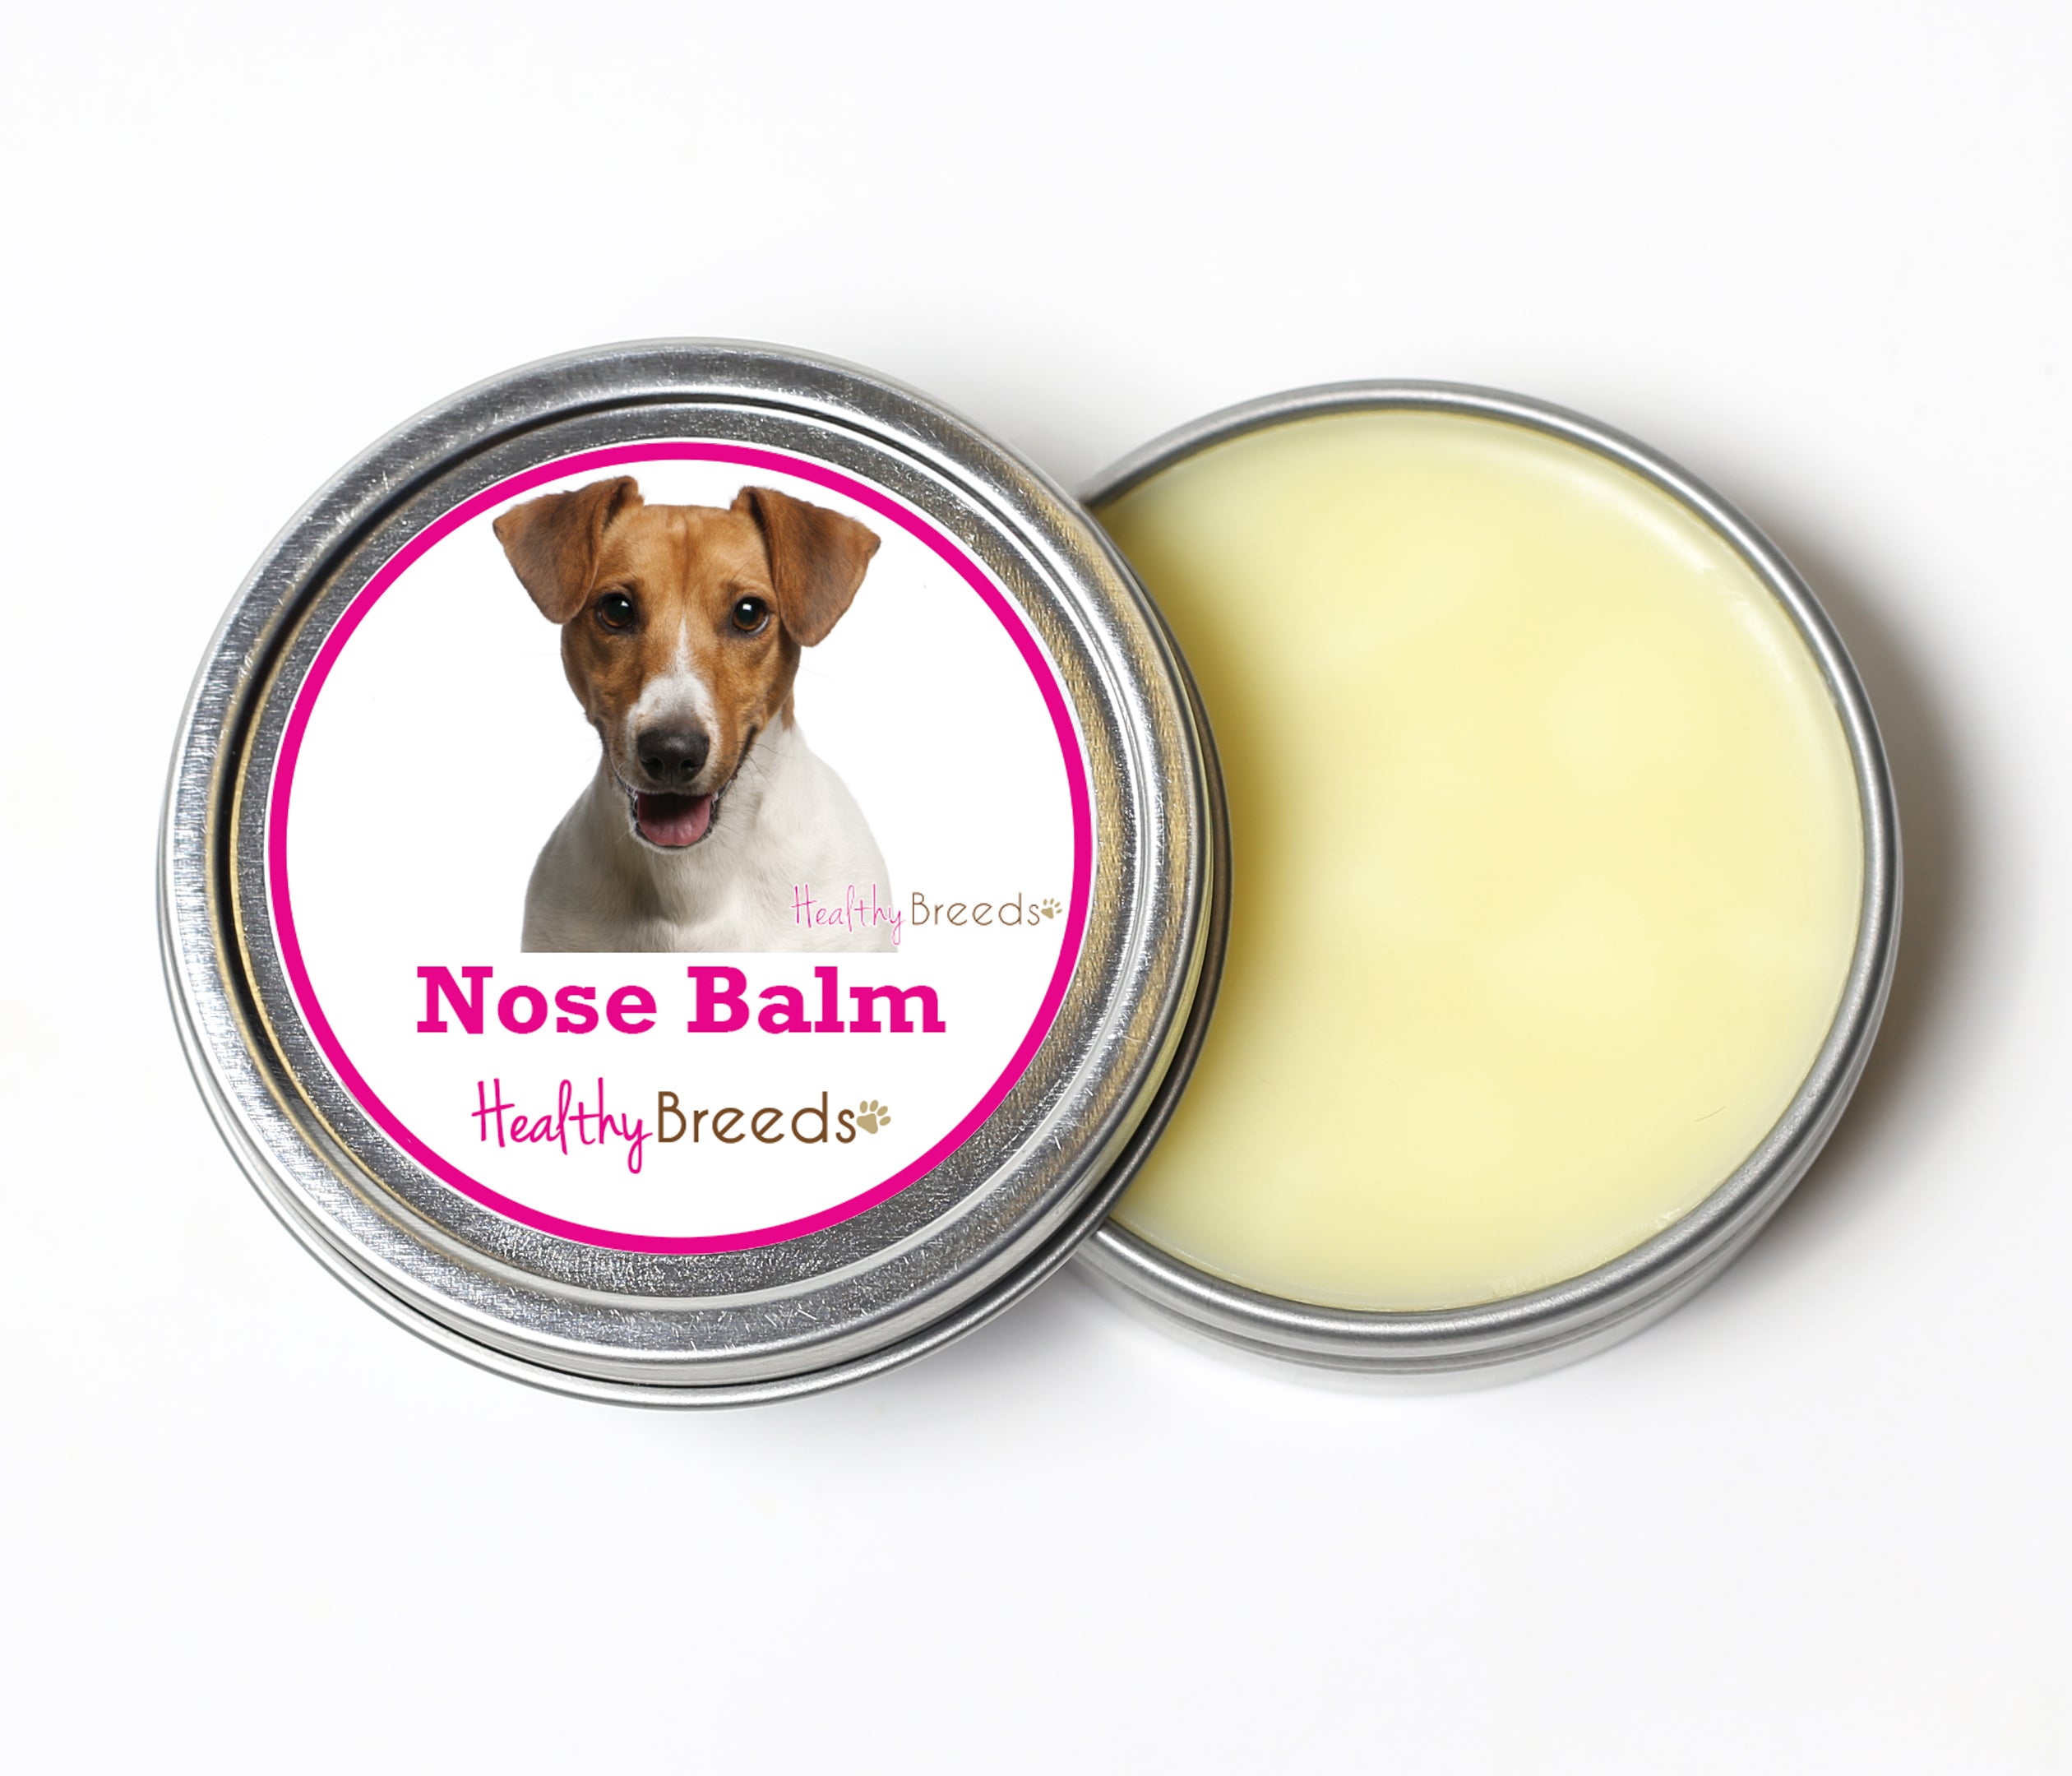 Jack Russell Terrier Dog Nose Balm 2 oz